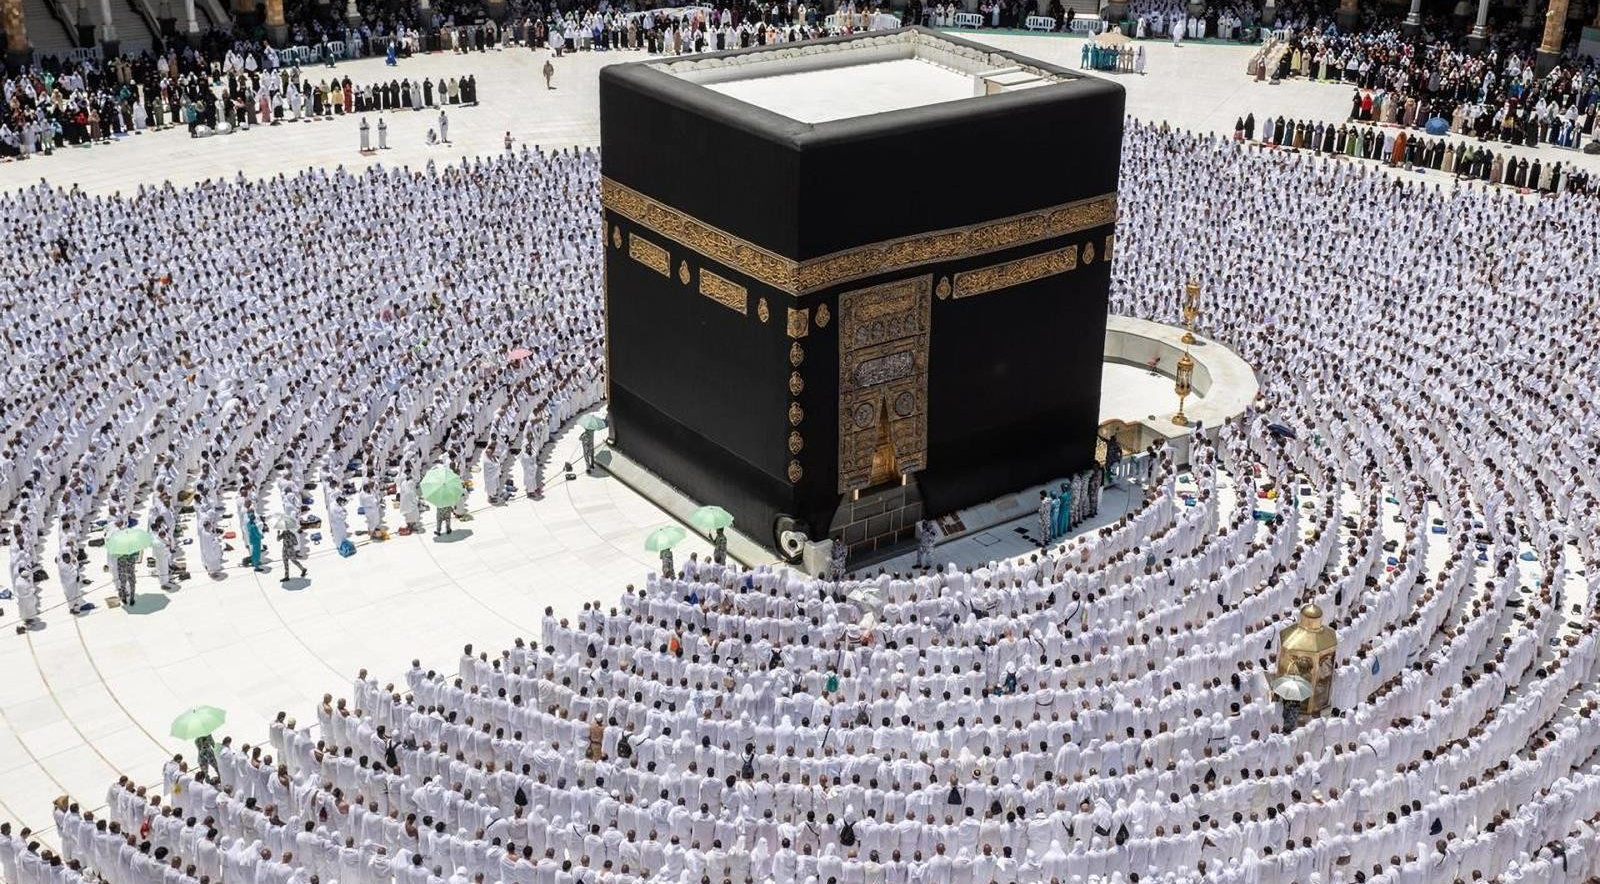 Mecca's Grand Mosque Imam Advises Muslims to Fear Allah and Worship Him